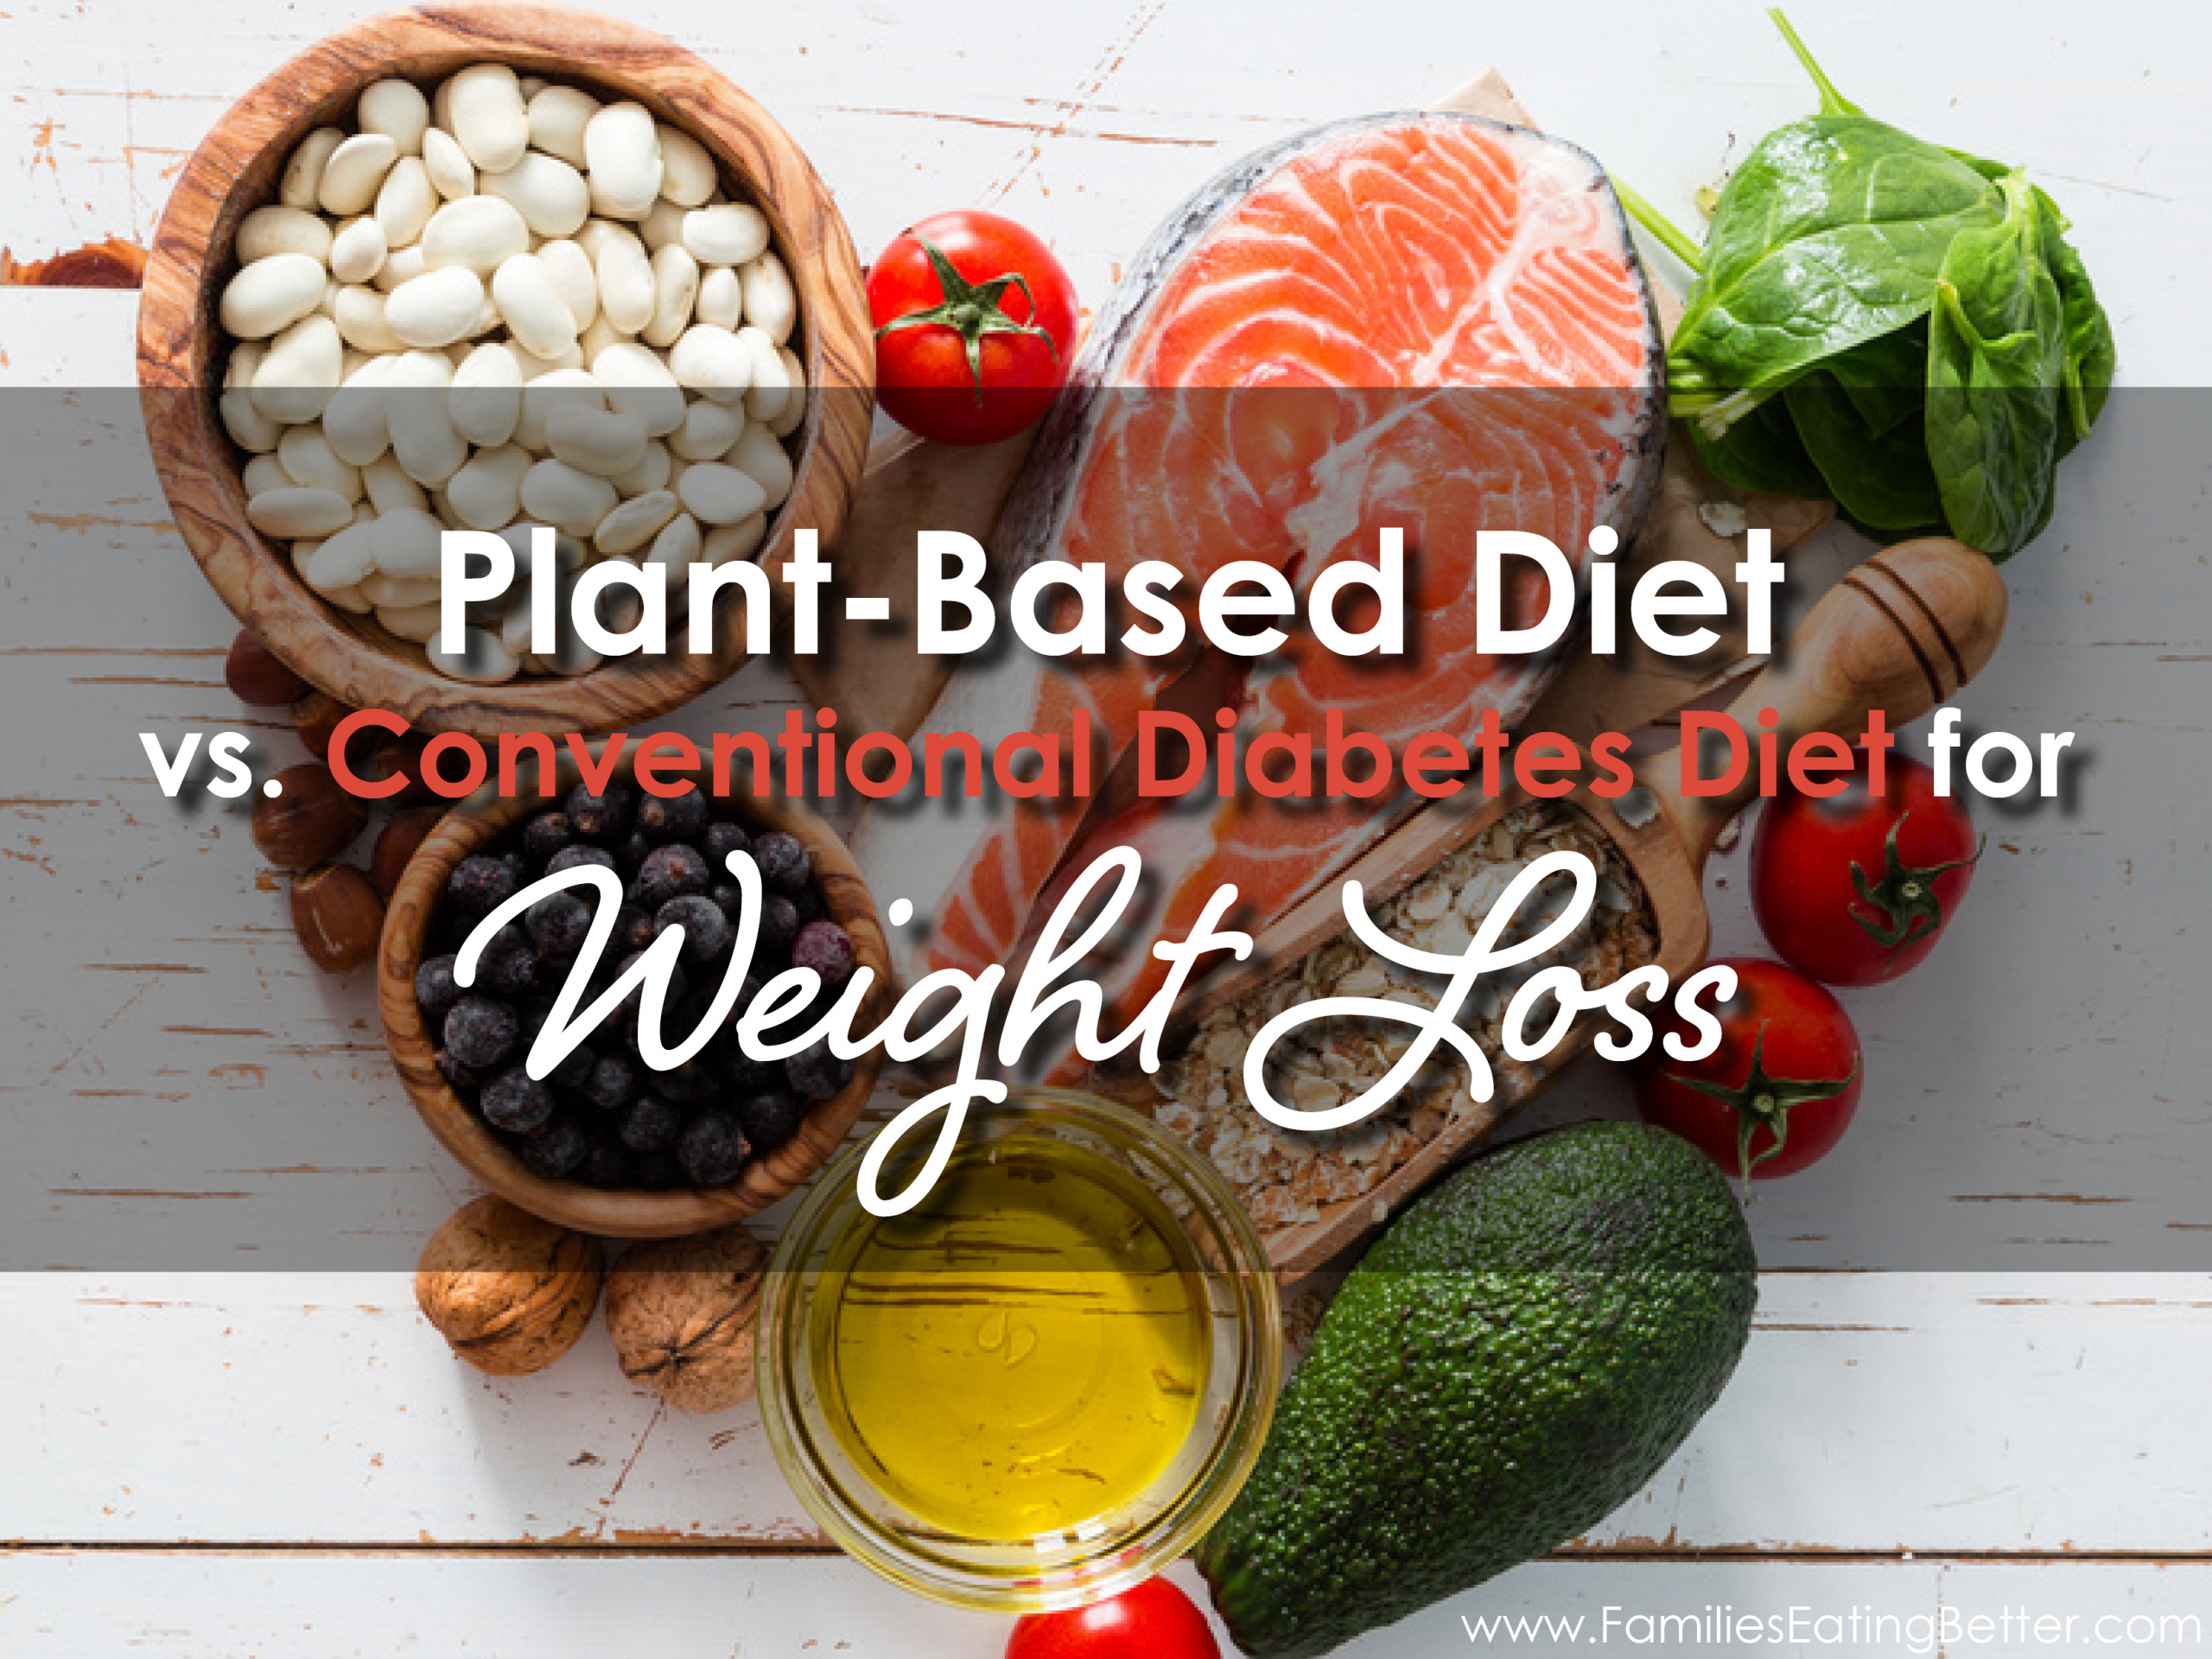 Plant Based Diet For Weight Loss
 Plant Based Diet vs a Conventional Diabetes Diet for